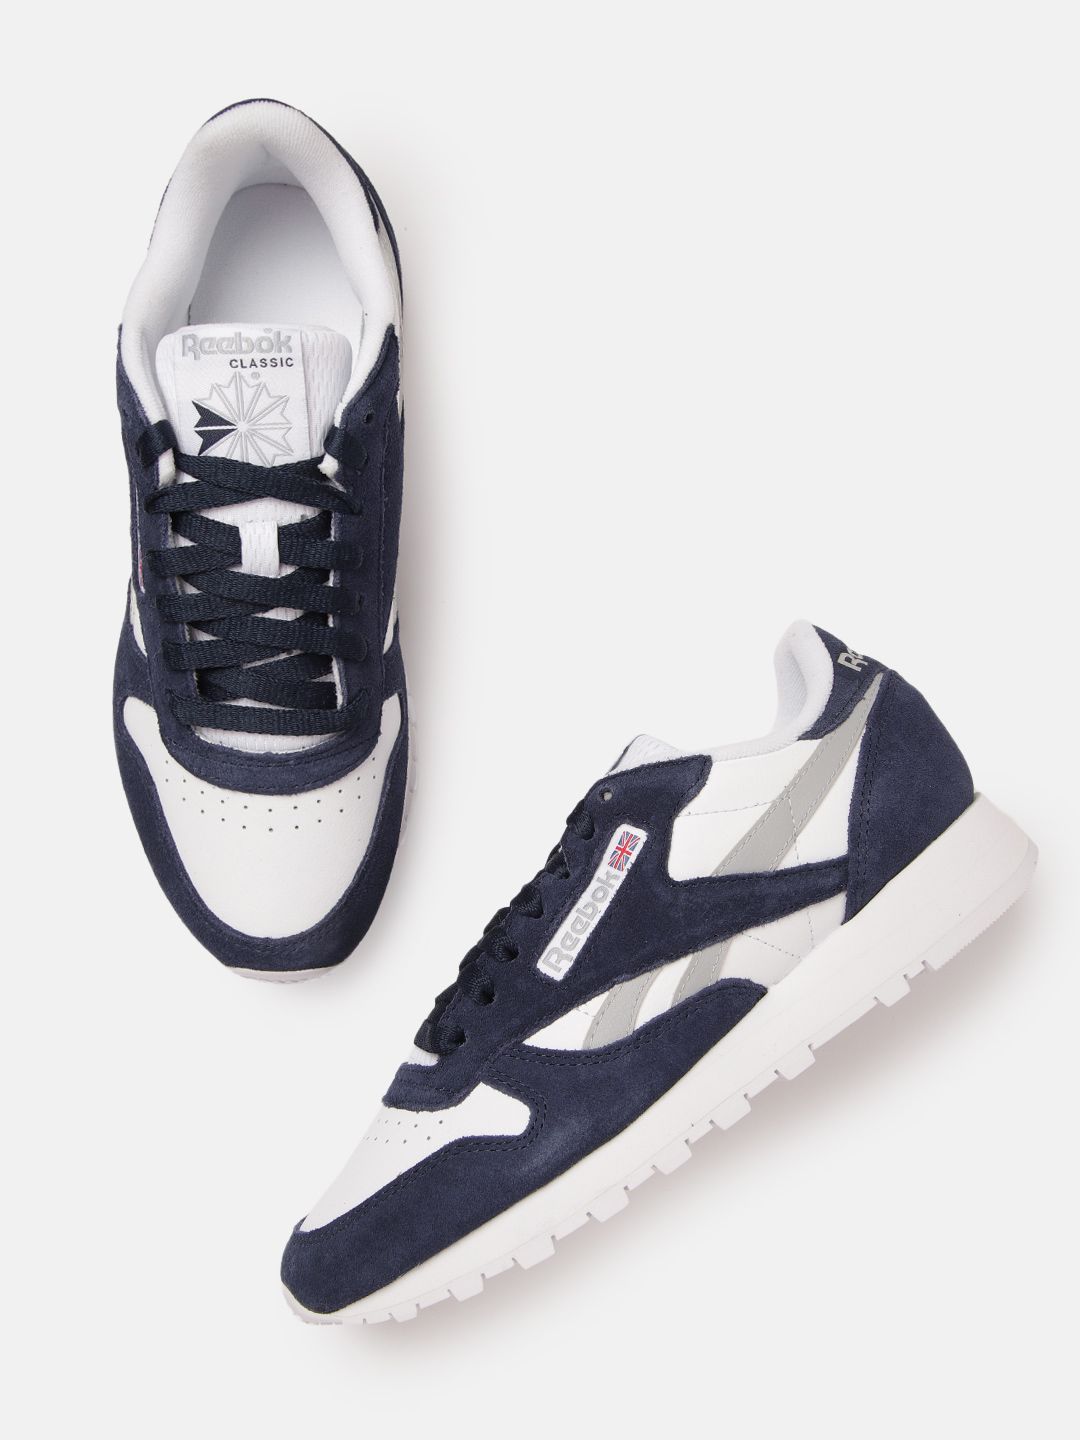 Reebok Classic Unisex Navy Blue & White Colourblocked Leather Sneakers Price in India